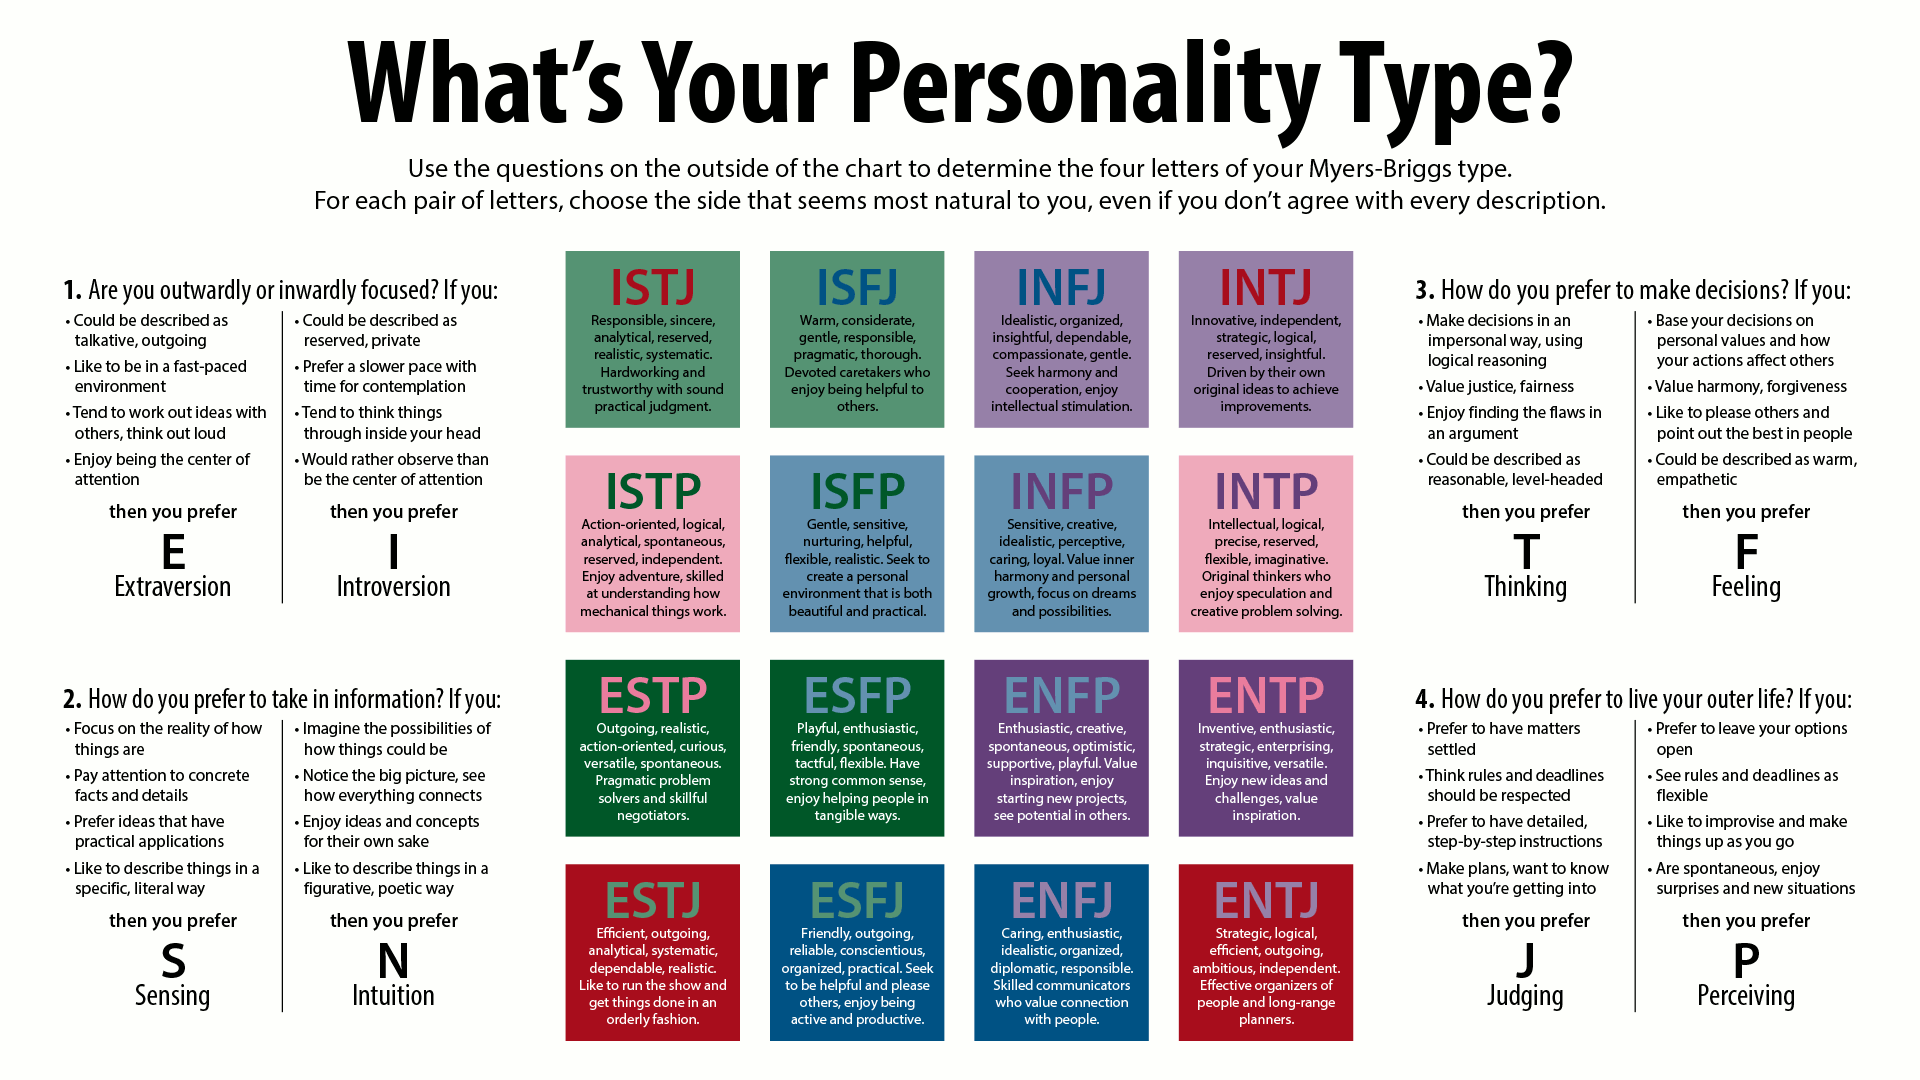 What's your personality type?